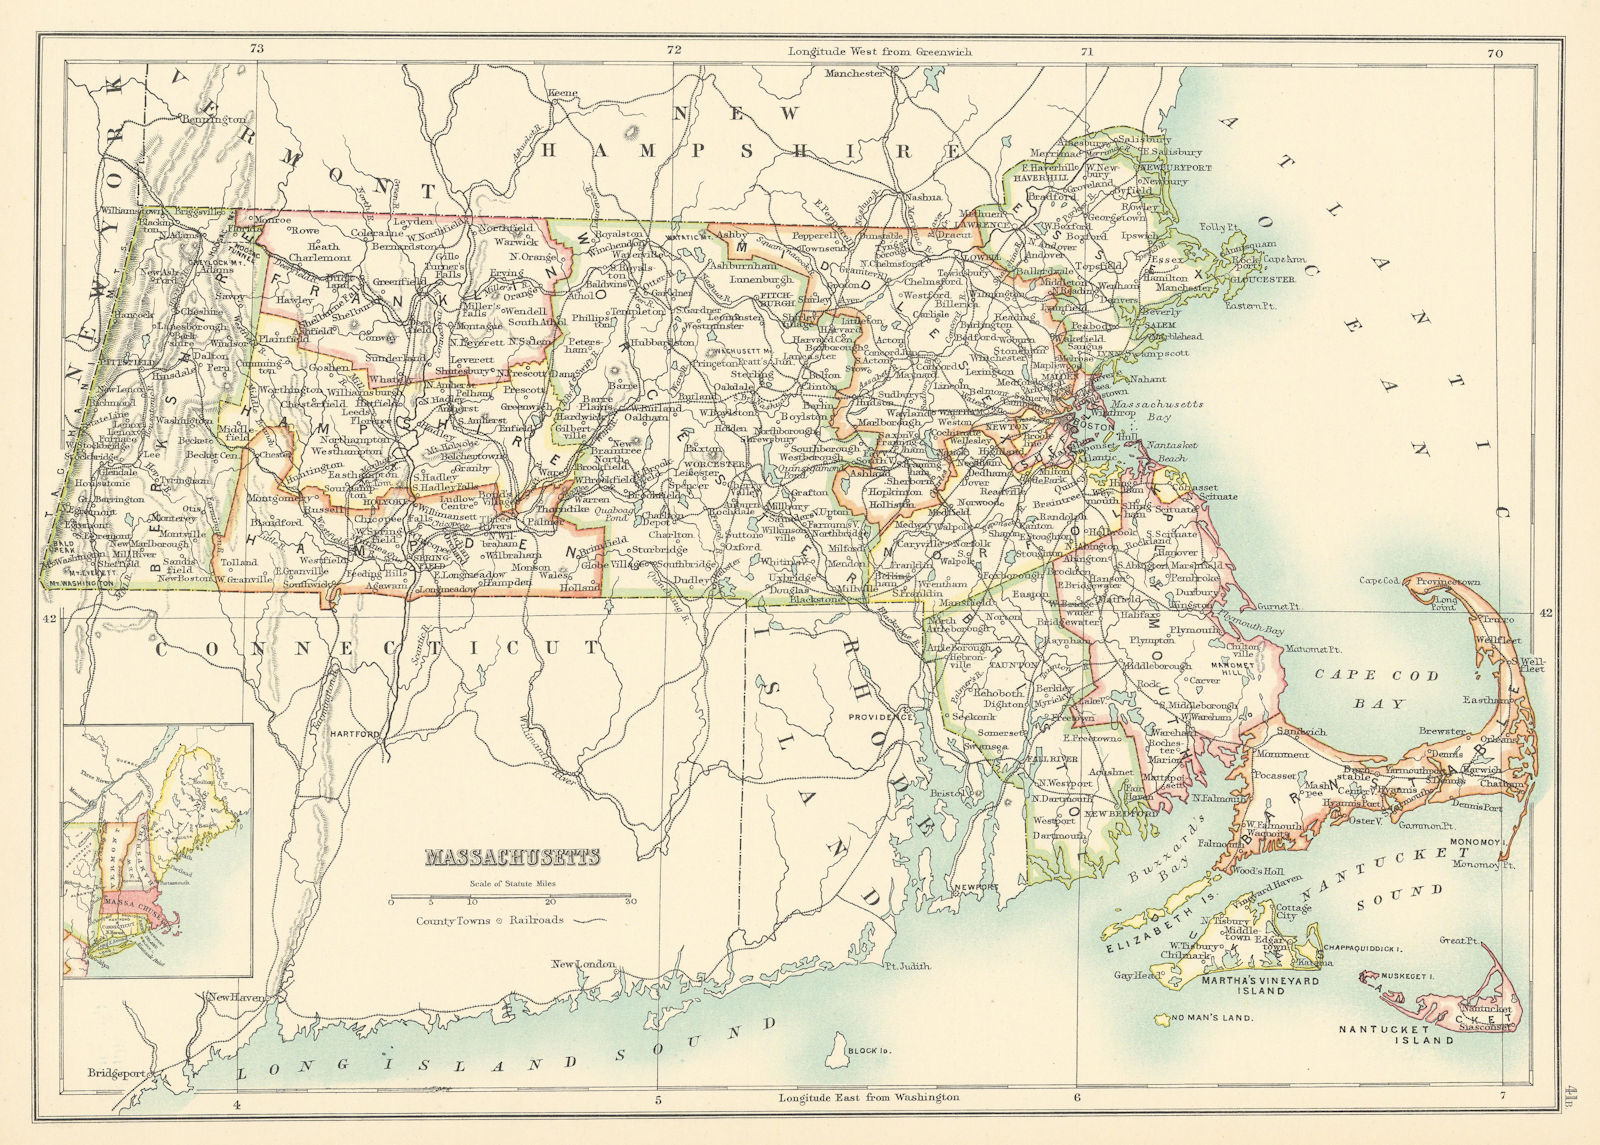 Associate Product Massachusetts state map showing counties. BARTHOLOMEW 1898 old antique